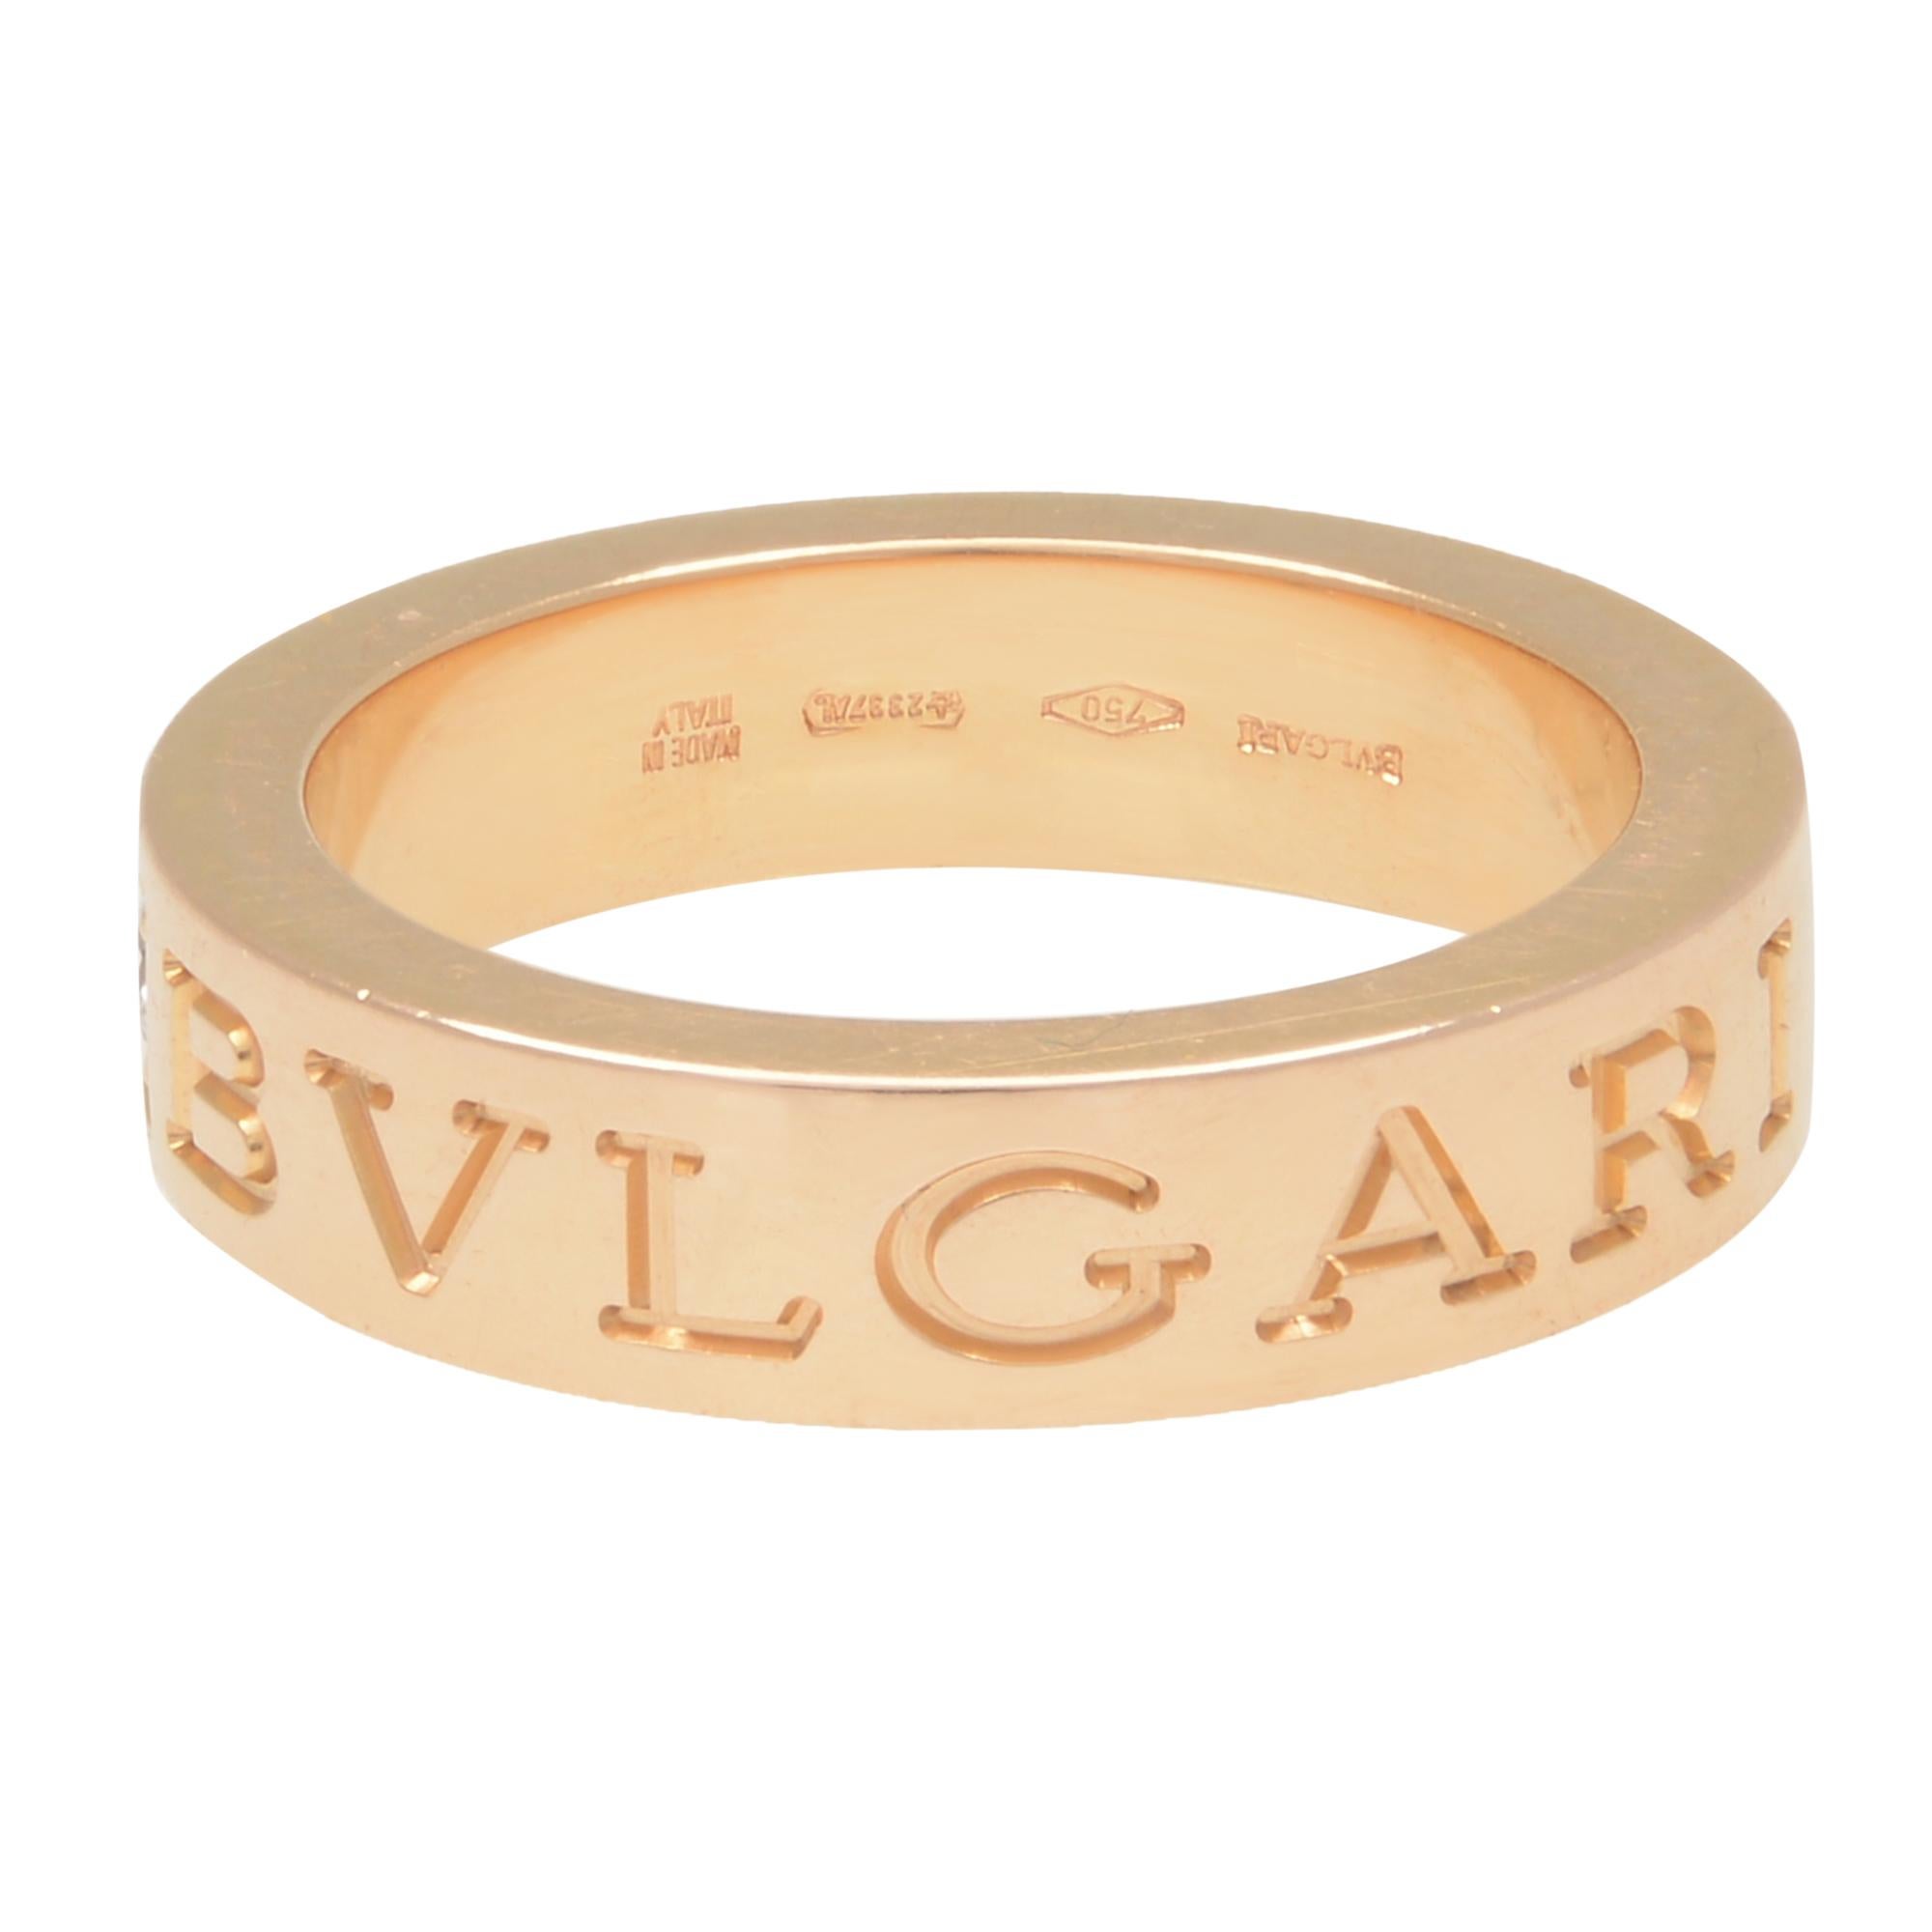 Bvlgari 18k rose gold ring with one diamond. Width: 4.00mm. Ring size 3.75. Looks great as a pinky ring. Diamond weight: 0.04cttw. Excellent pre-owned condition. Comes with box. Papers are not included. 